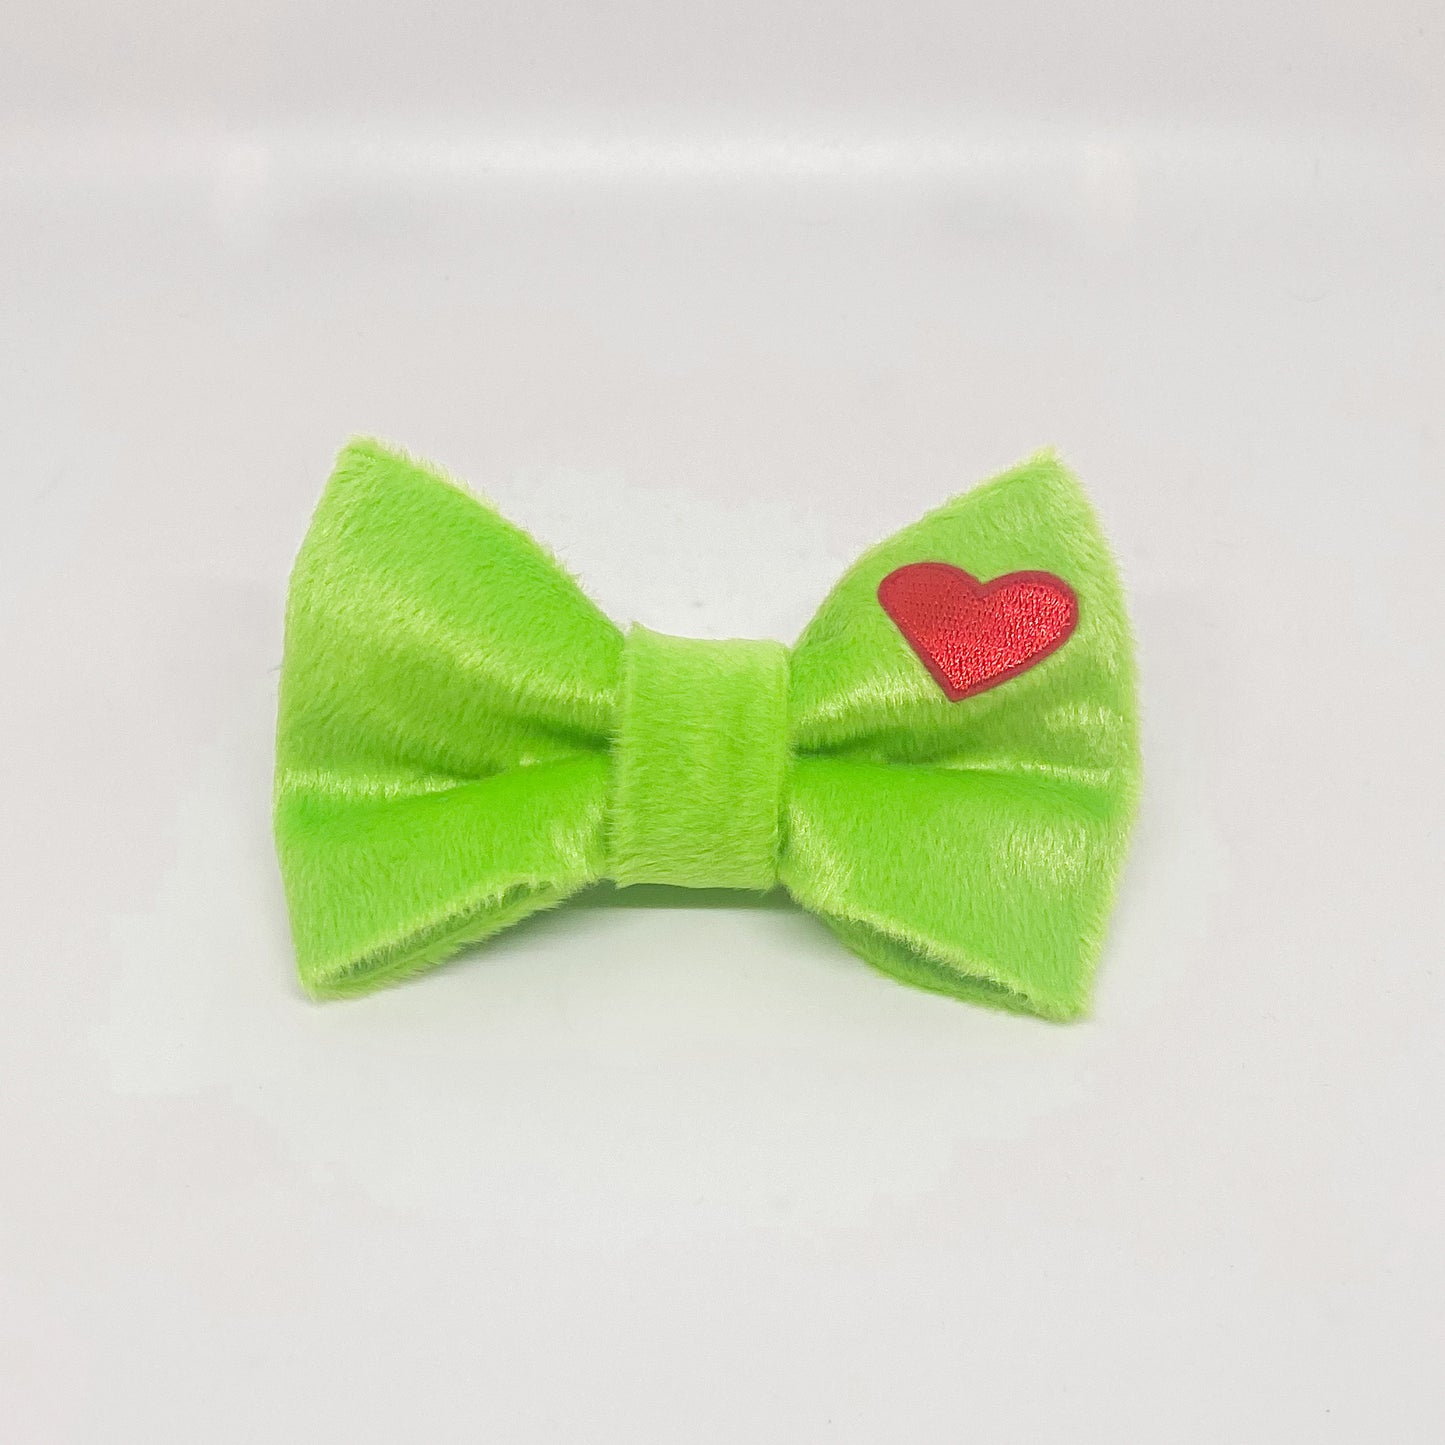 The Grinch Christmas Bow Tie